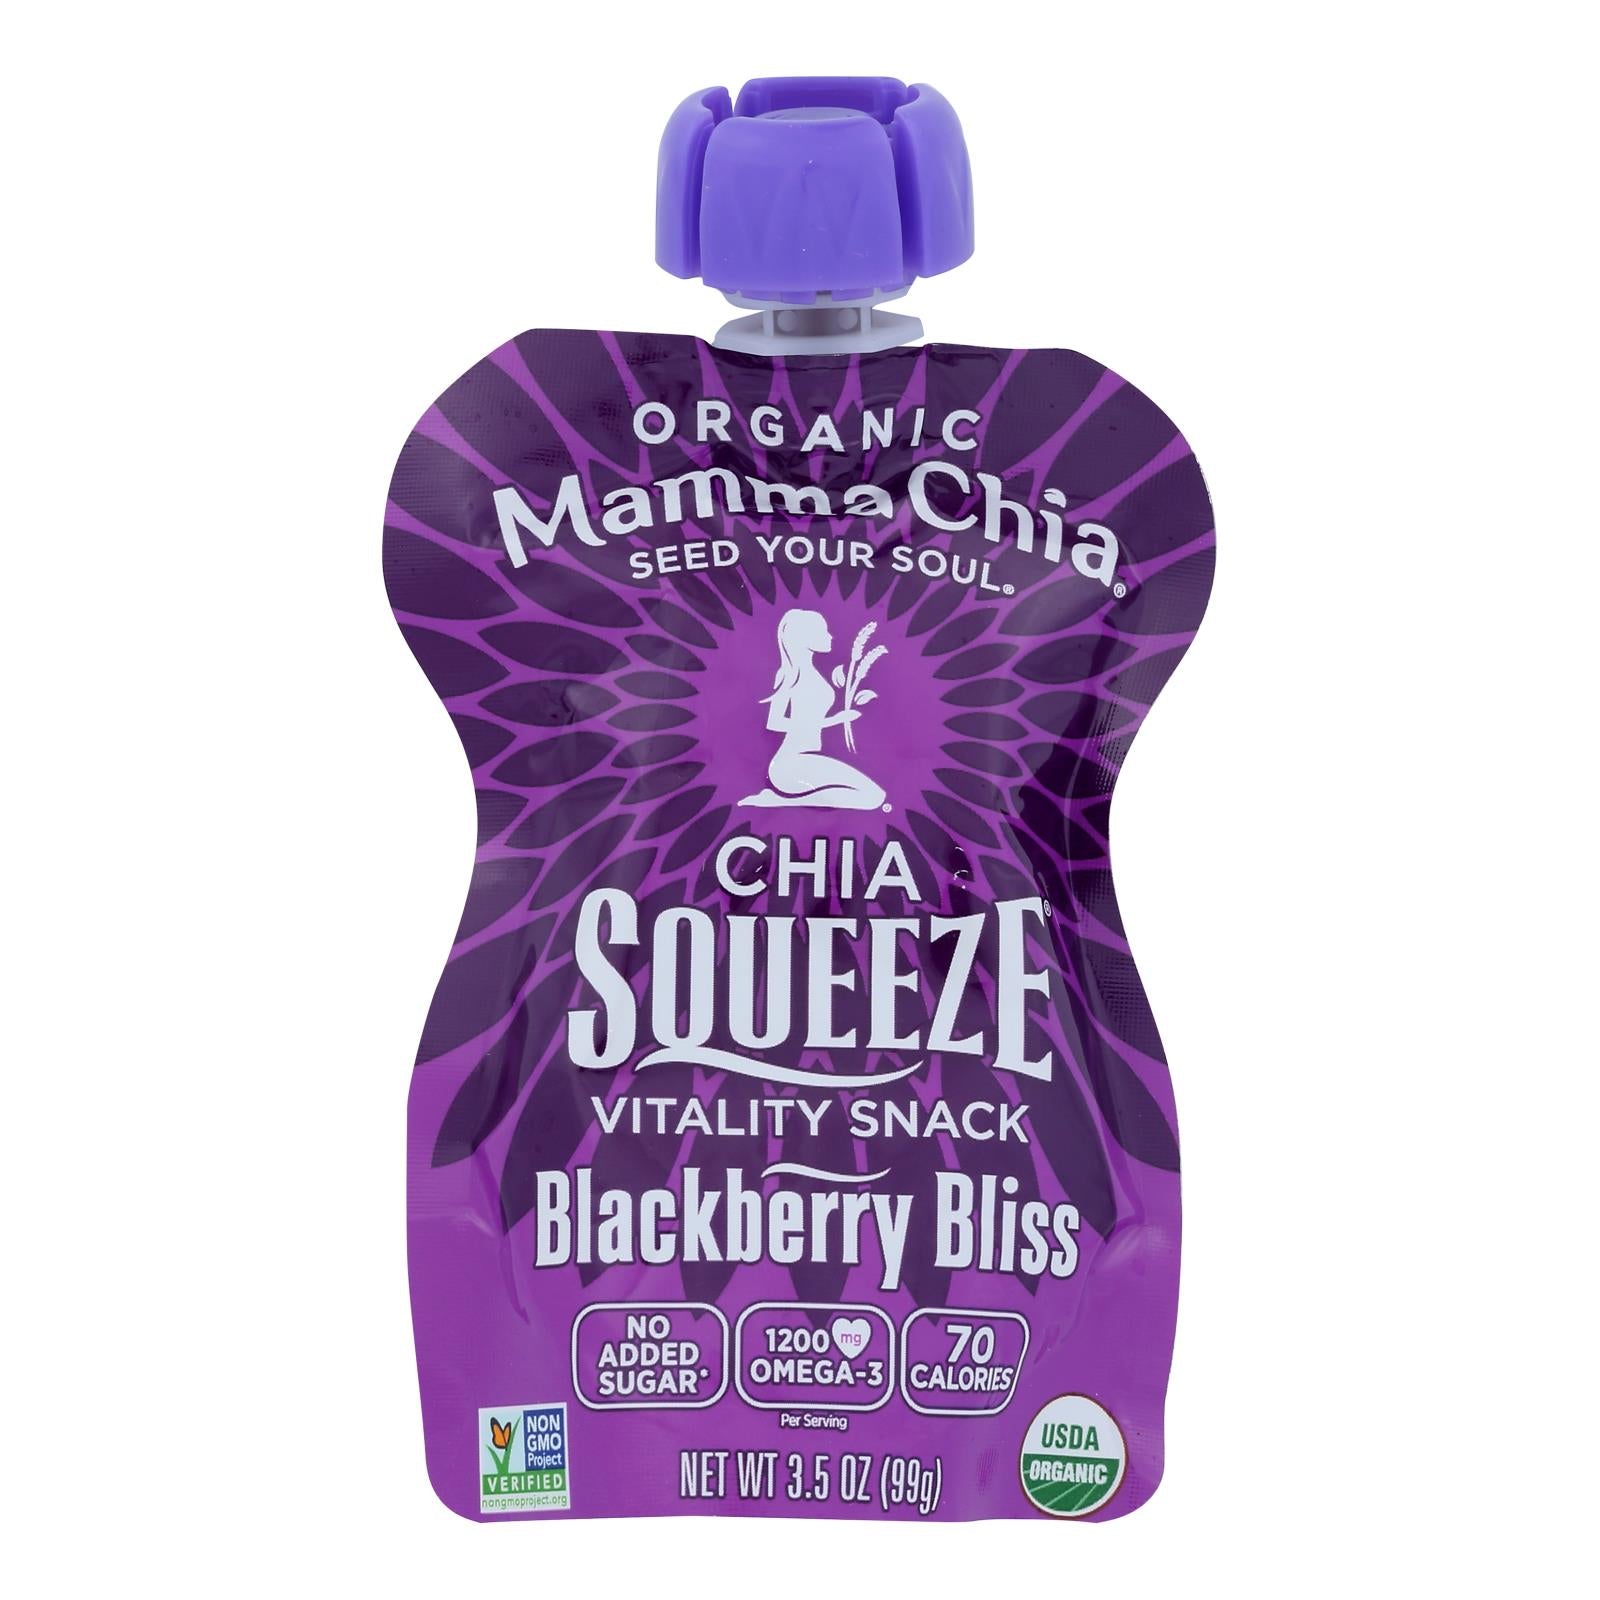 Mamma Chia, Mamma Chia Squeeze Vitality Snack - Blackberry Bliss - Case of 16 - 3.5 oz (Pack of 16)